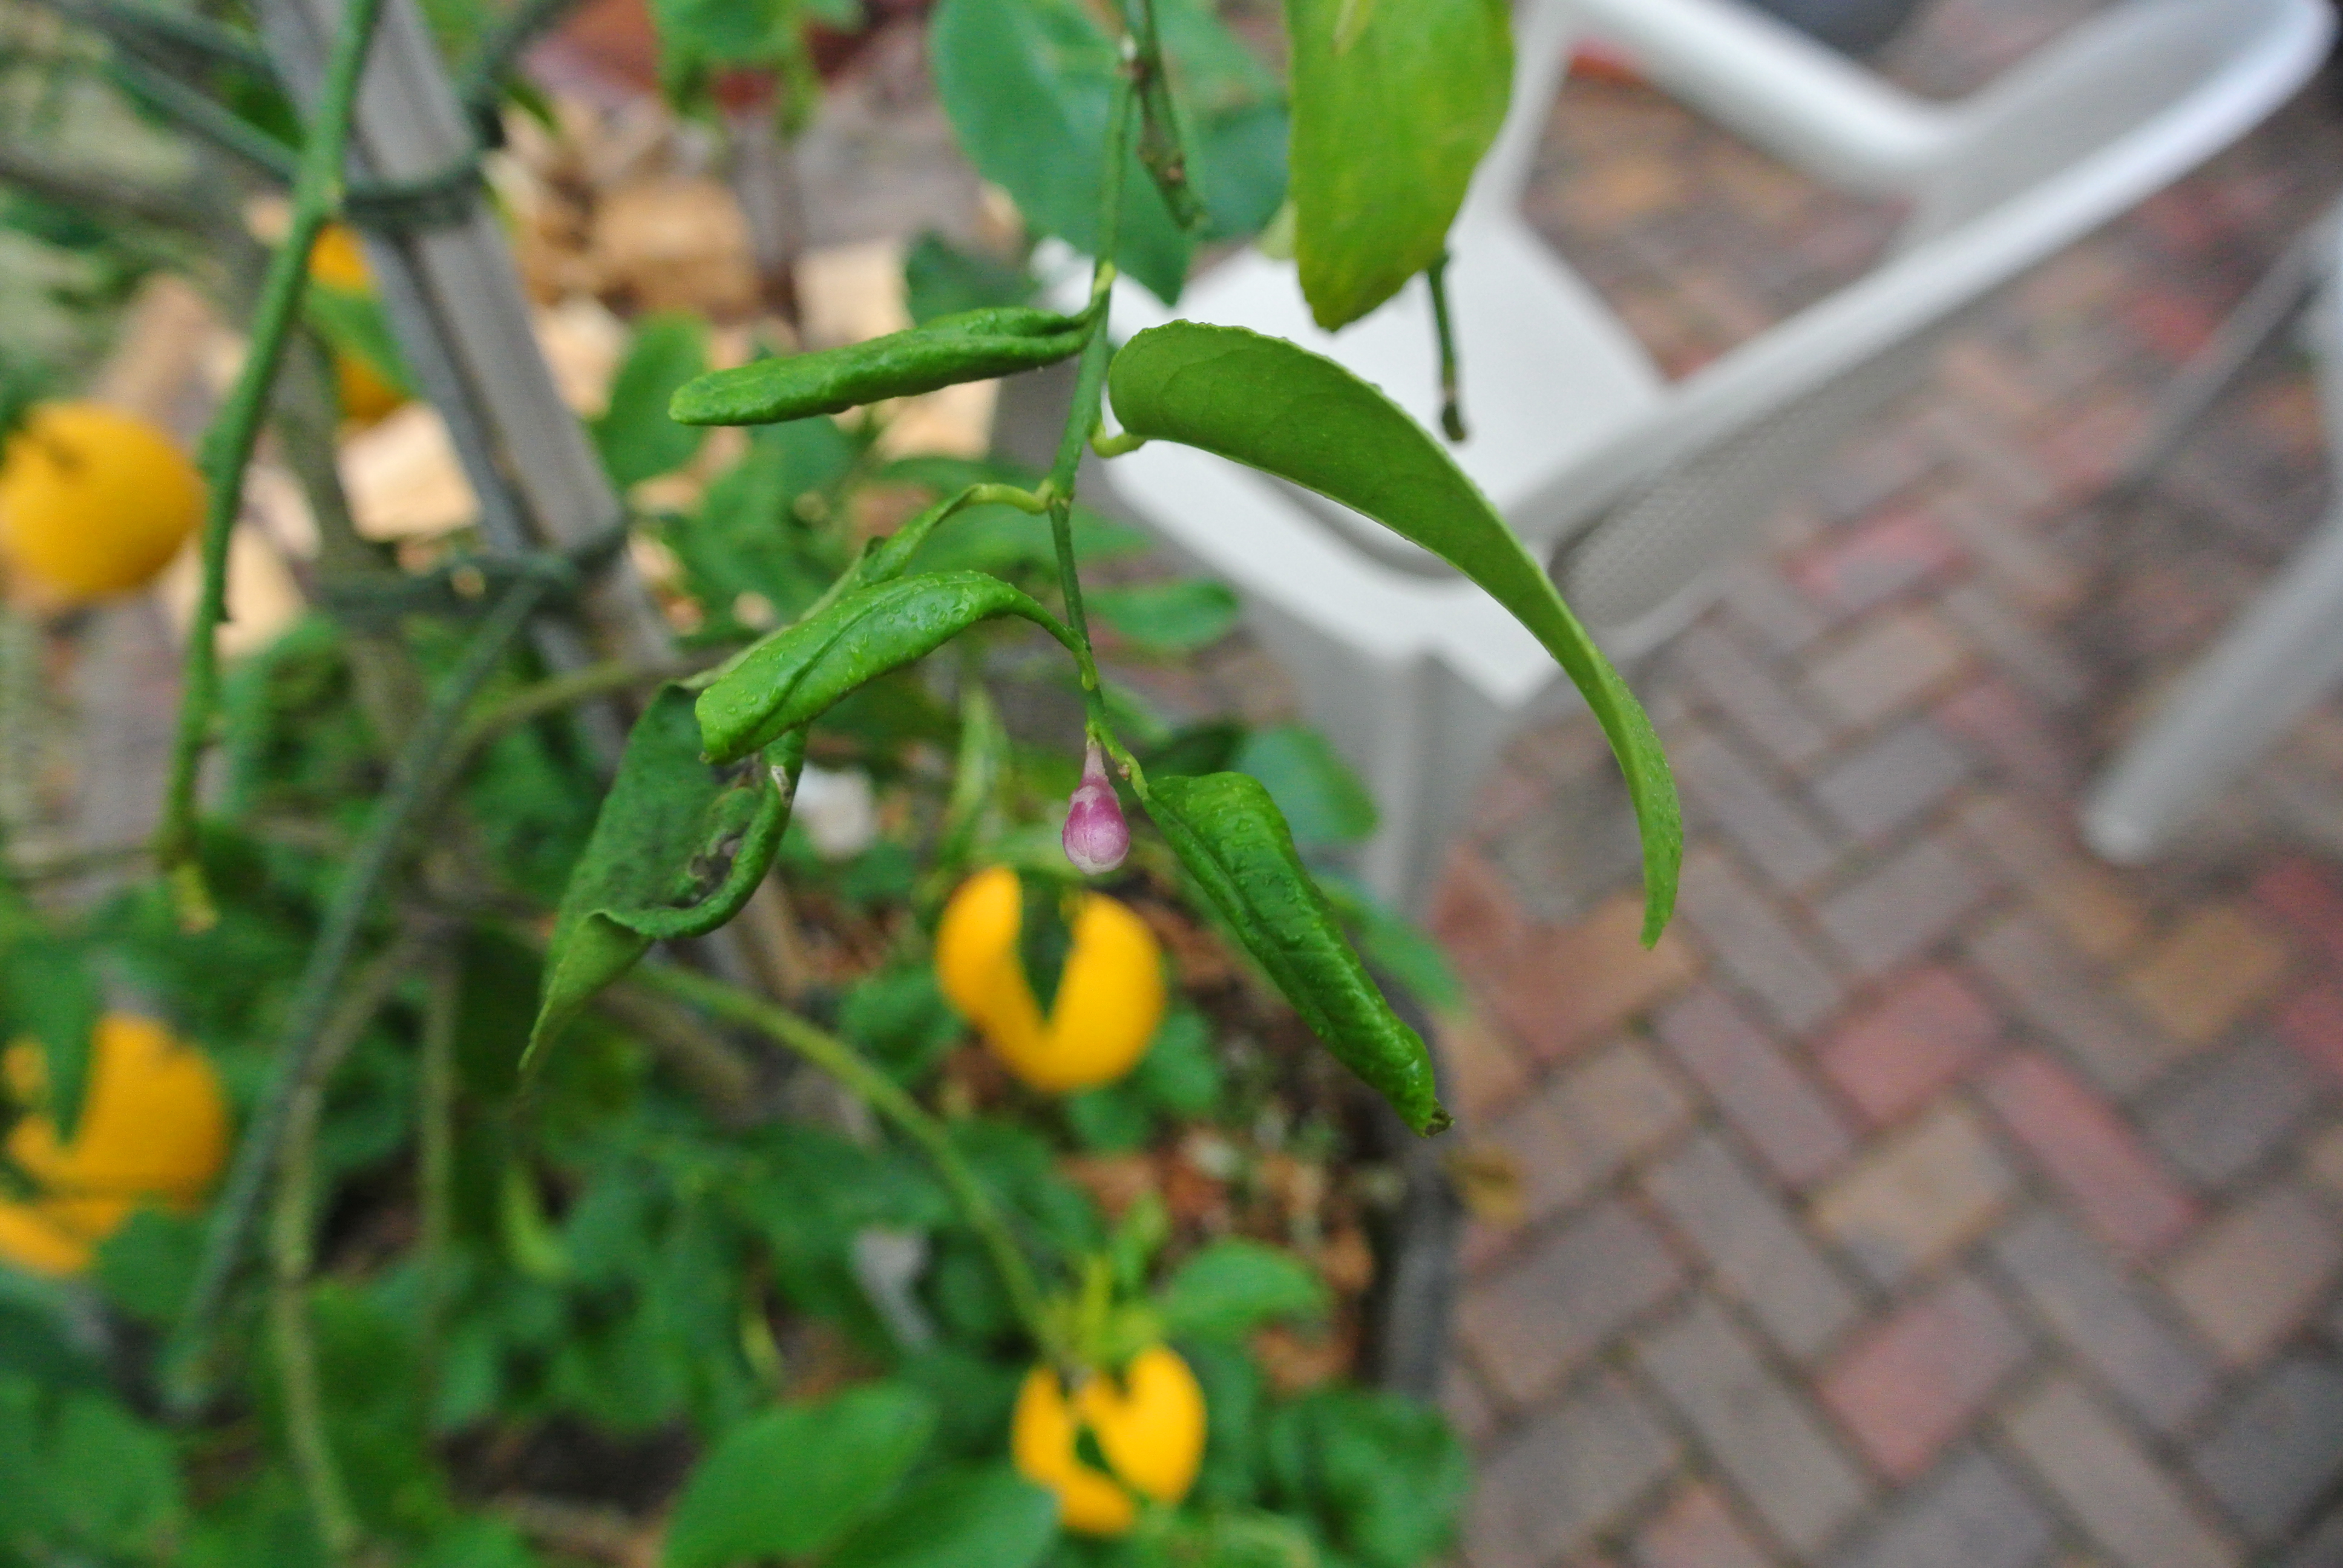 Look close...an out of focus  lemon blossom is forming as of New Years Eve 2012 - Northern Hemisphere.